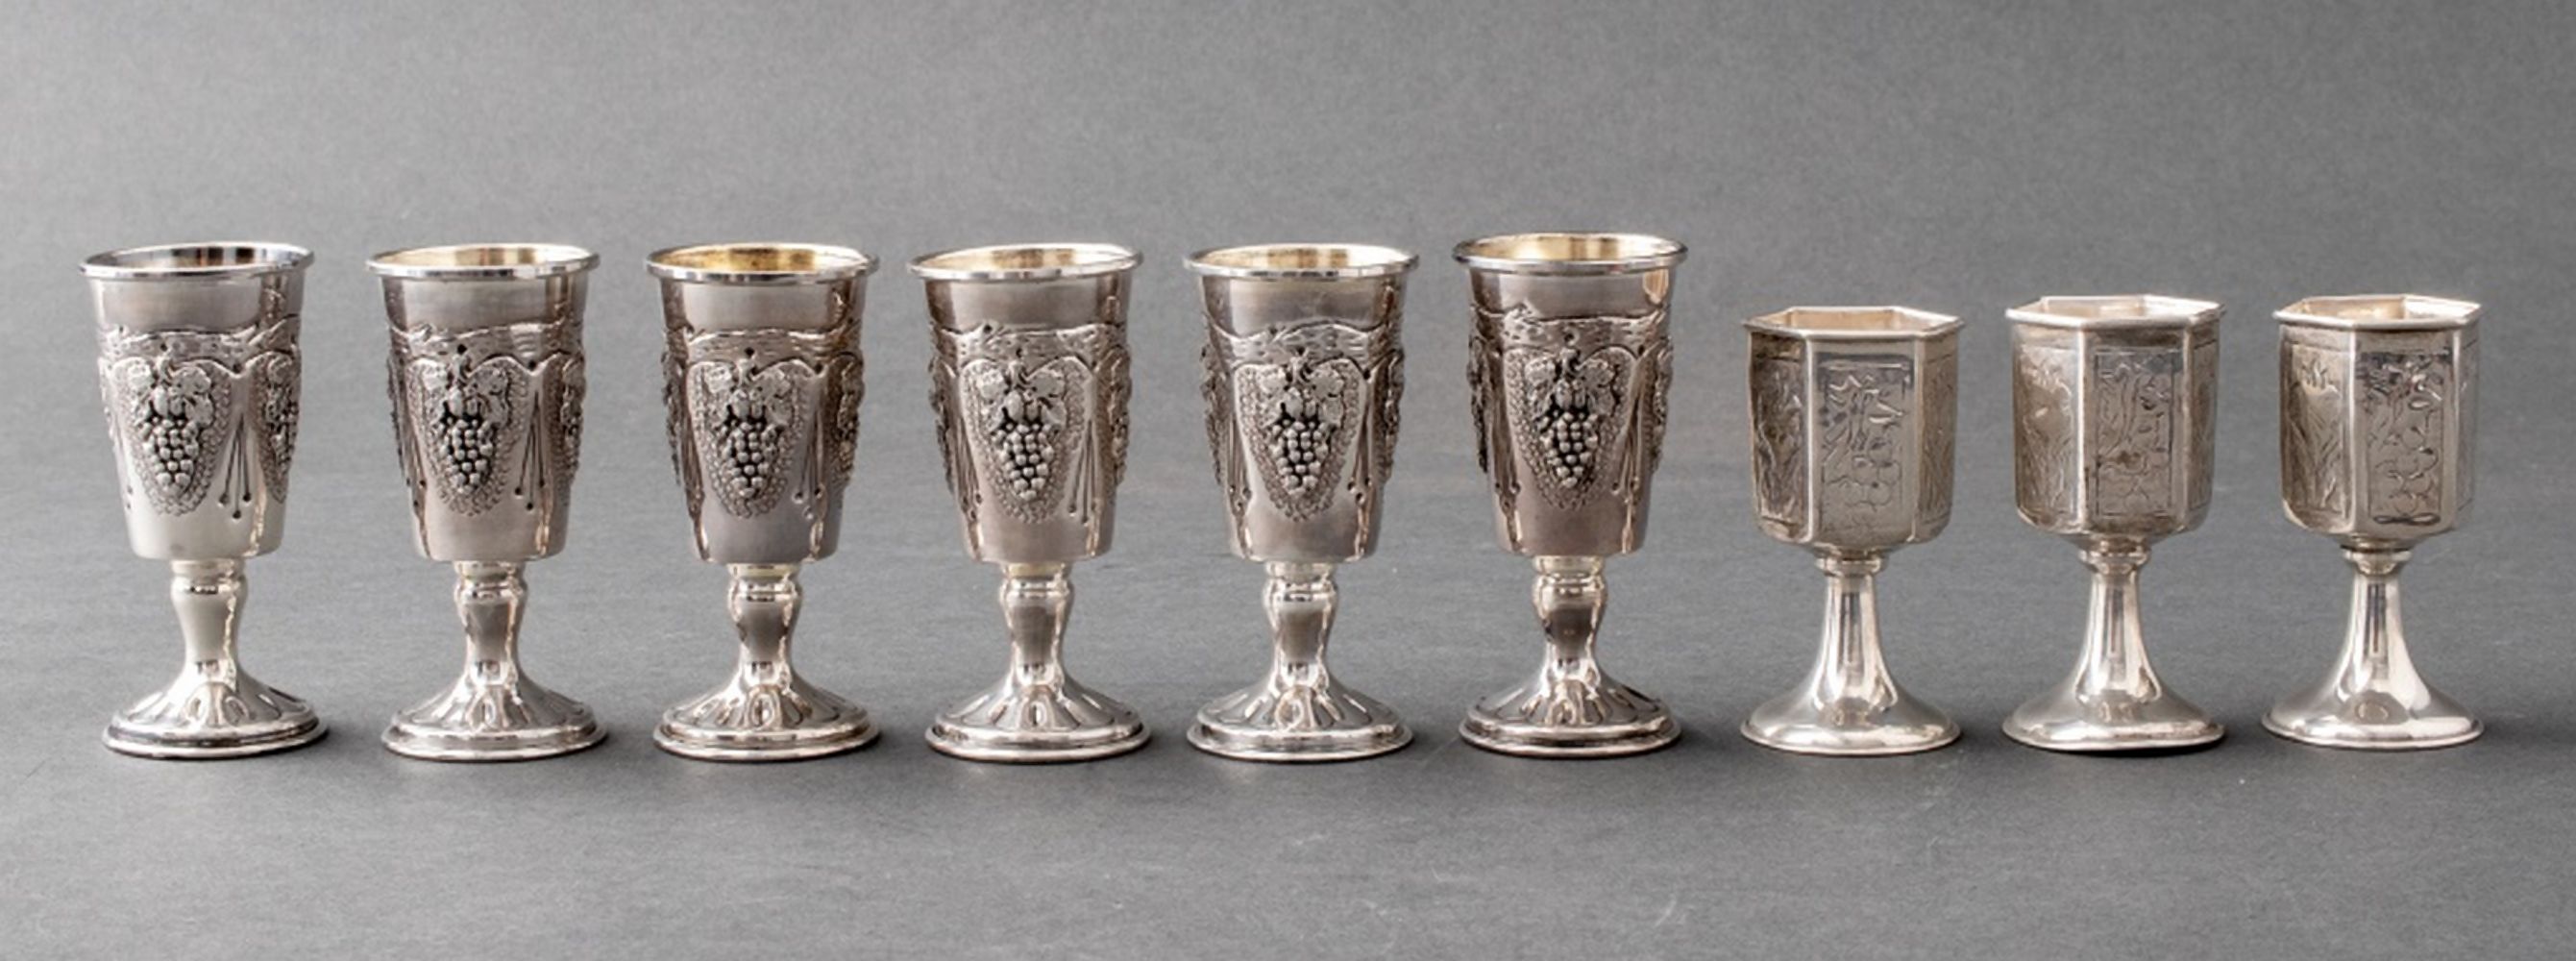 JUDAICA STERLING SILVER WINE CUPS  35ff7a